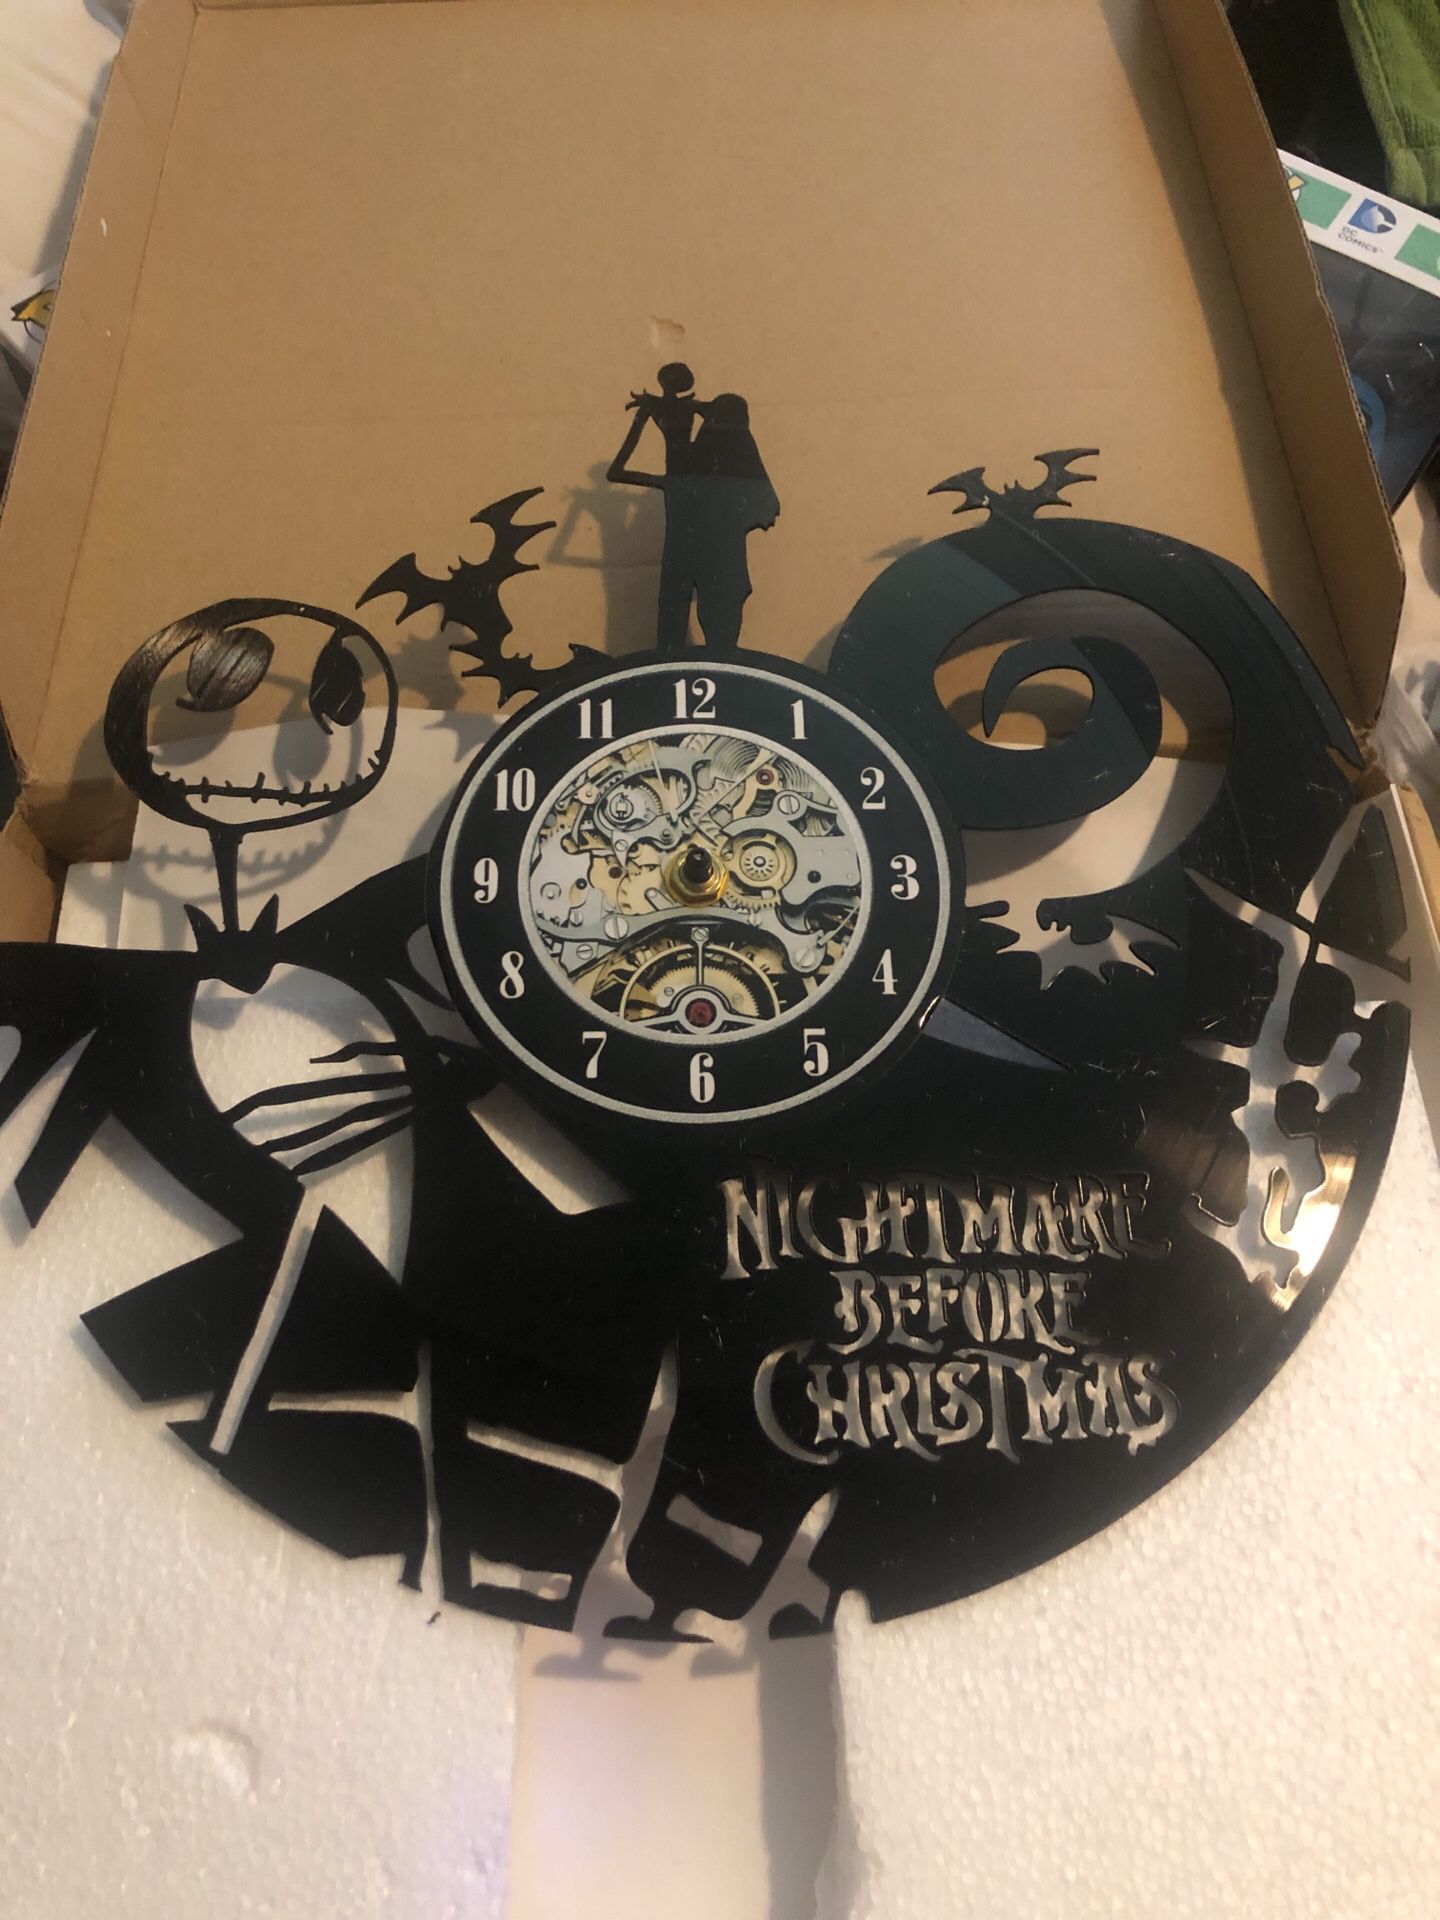 Record clock the nightmare before Christmas